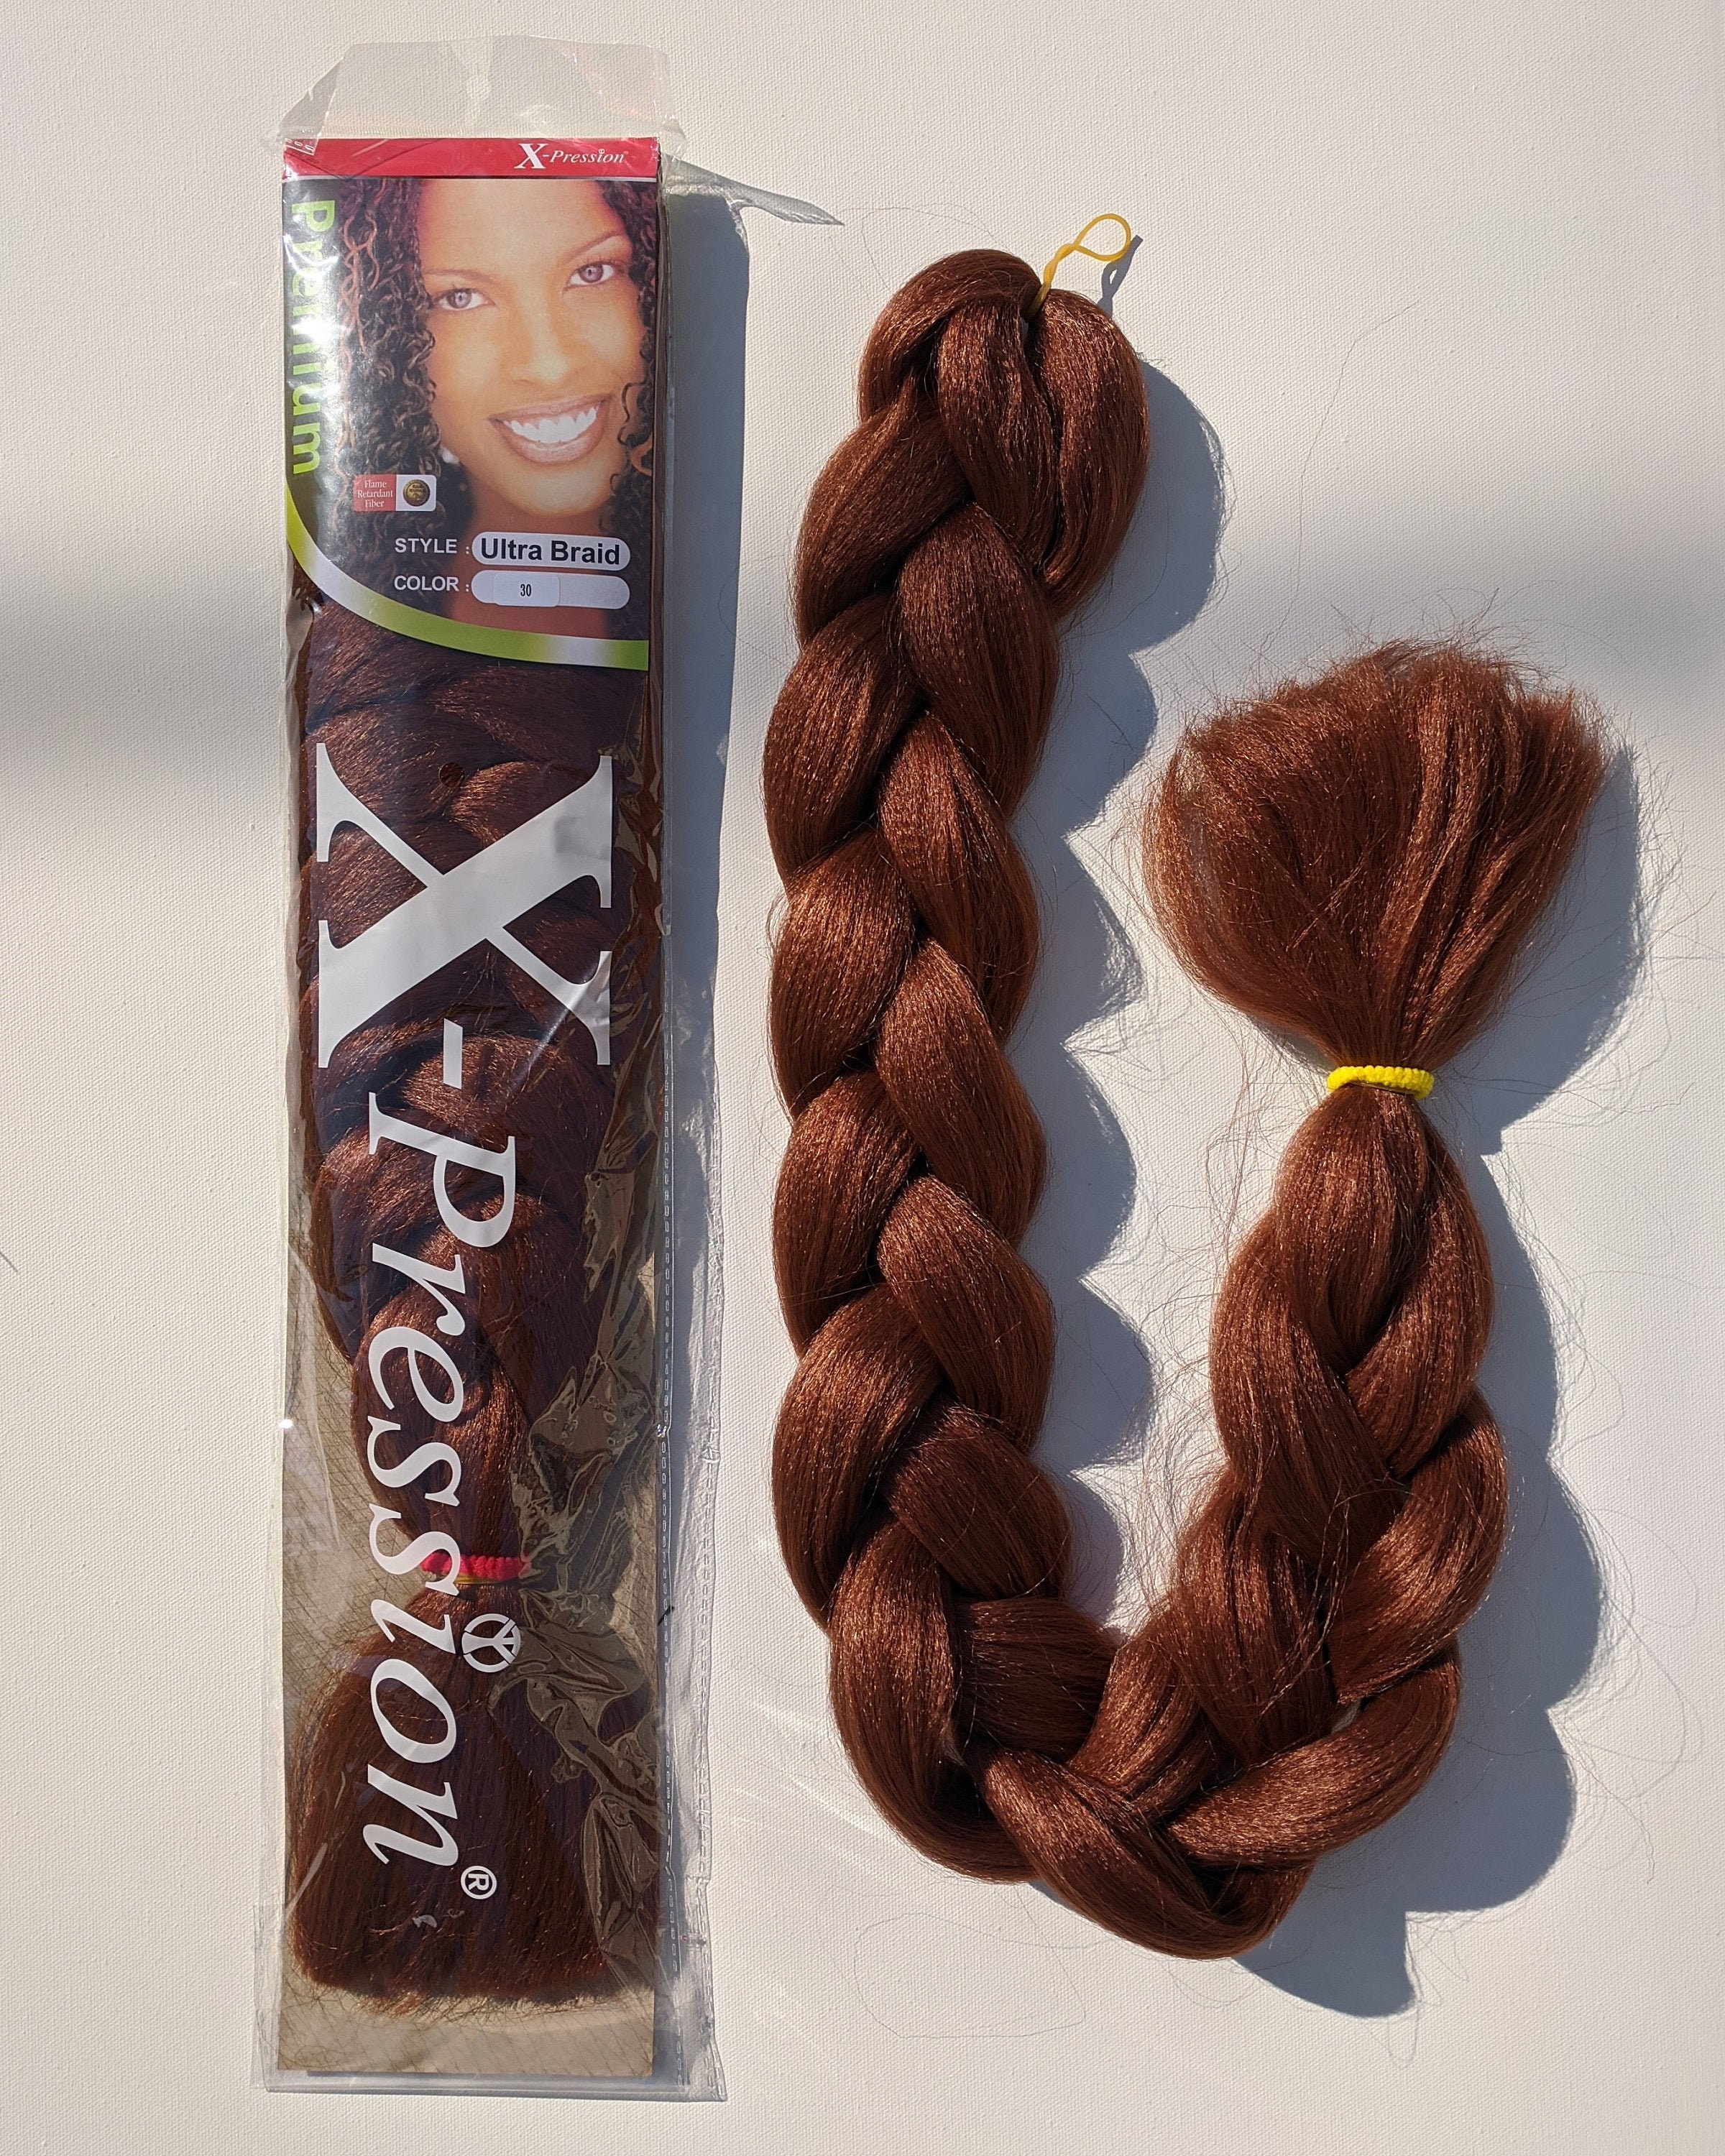 X-pression Xpressions Expressions Ultra Braid Hair Color 30 - Etsy